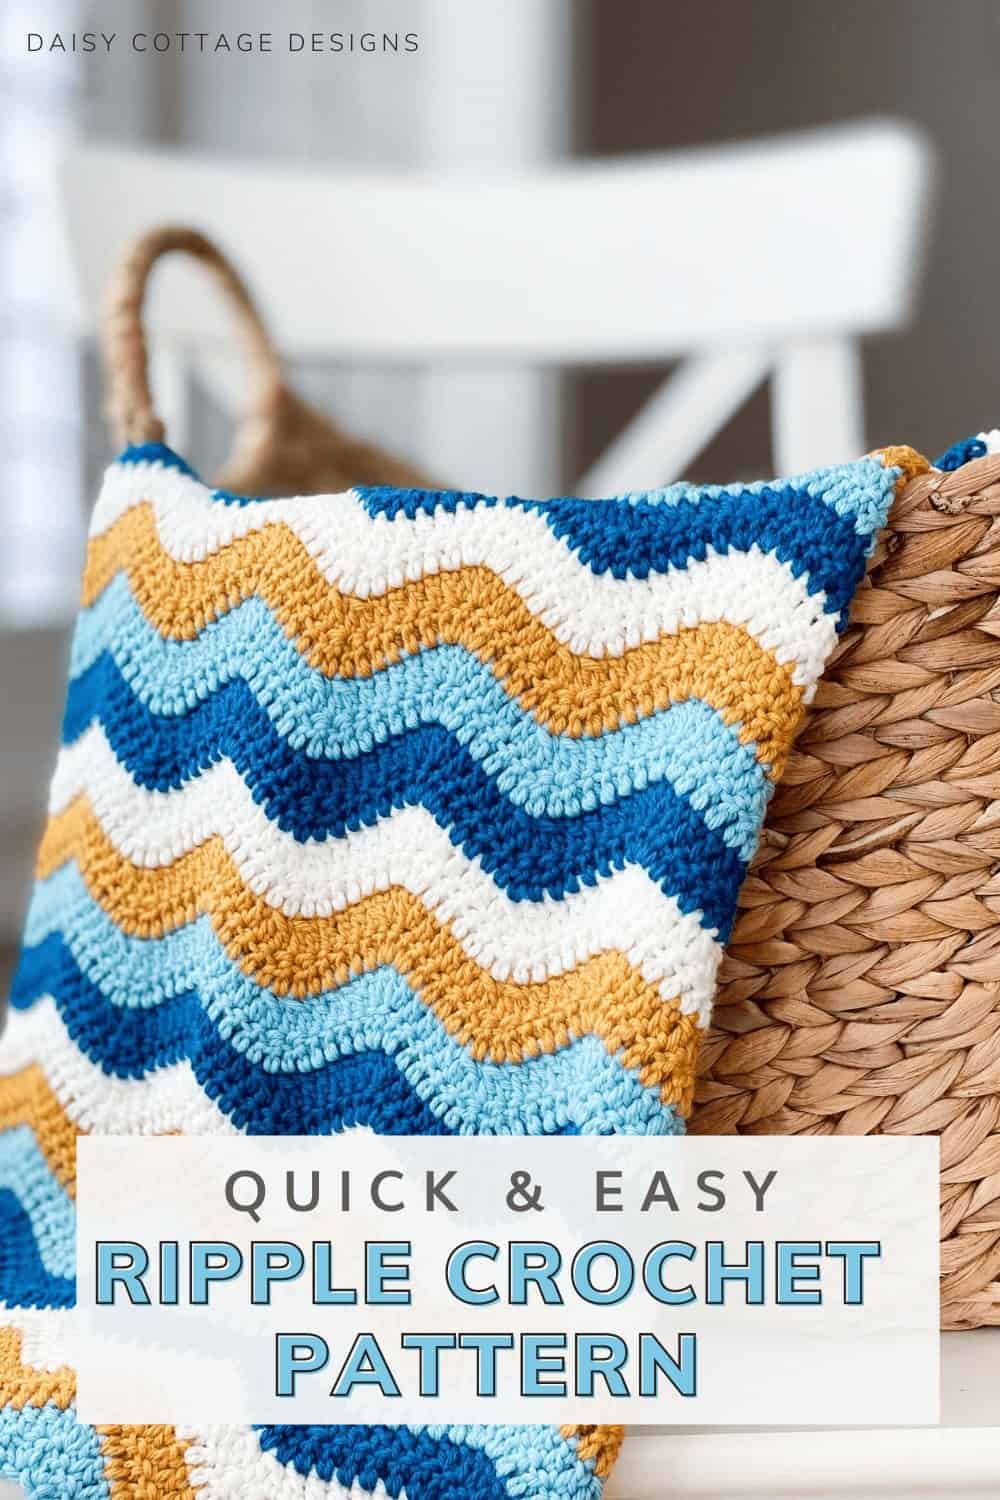 This classic ripple crochet blanket is quick to make and the free crochet pattern is easy to follow. Follow this tutorial and have a beautiful blanket by the weekend! 